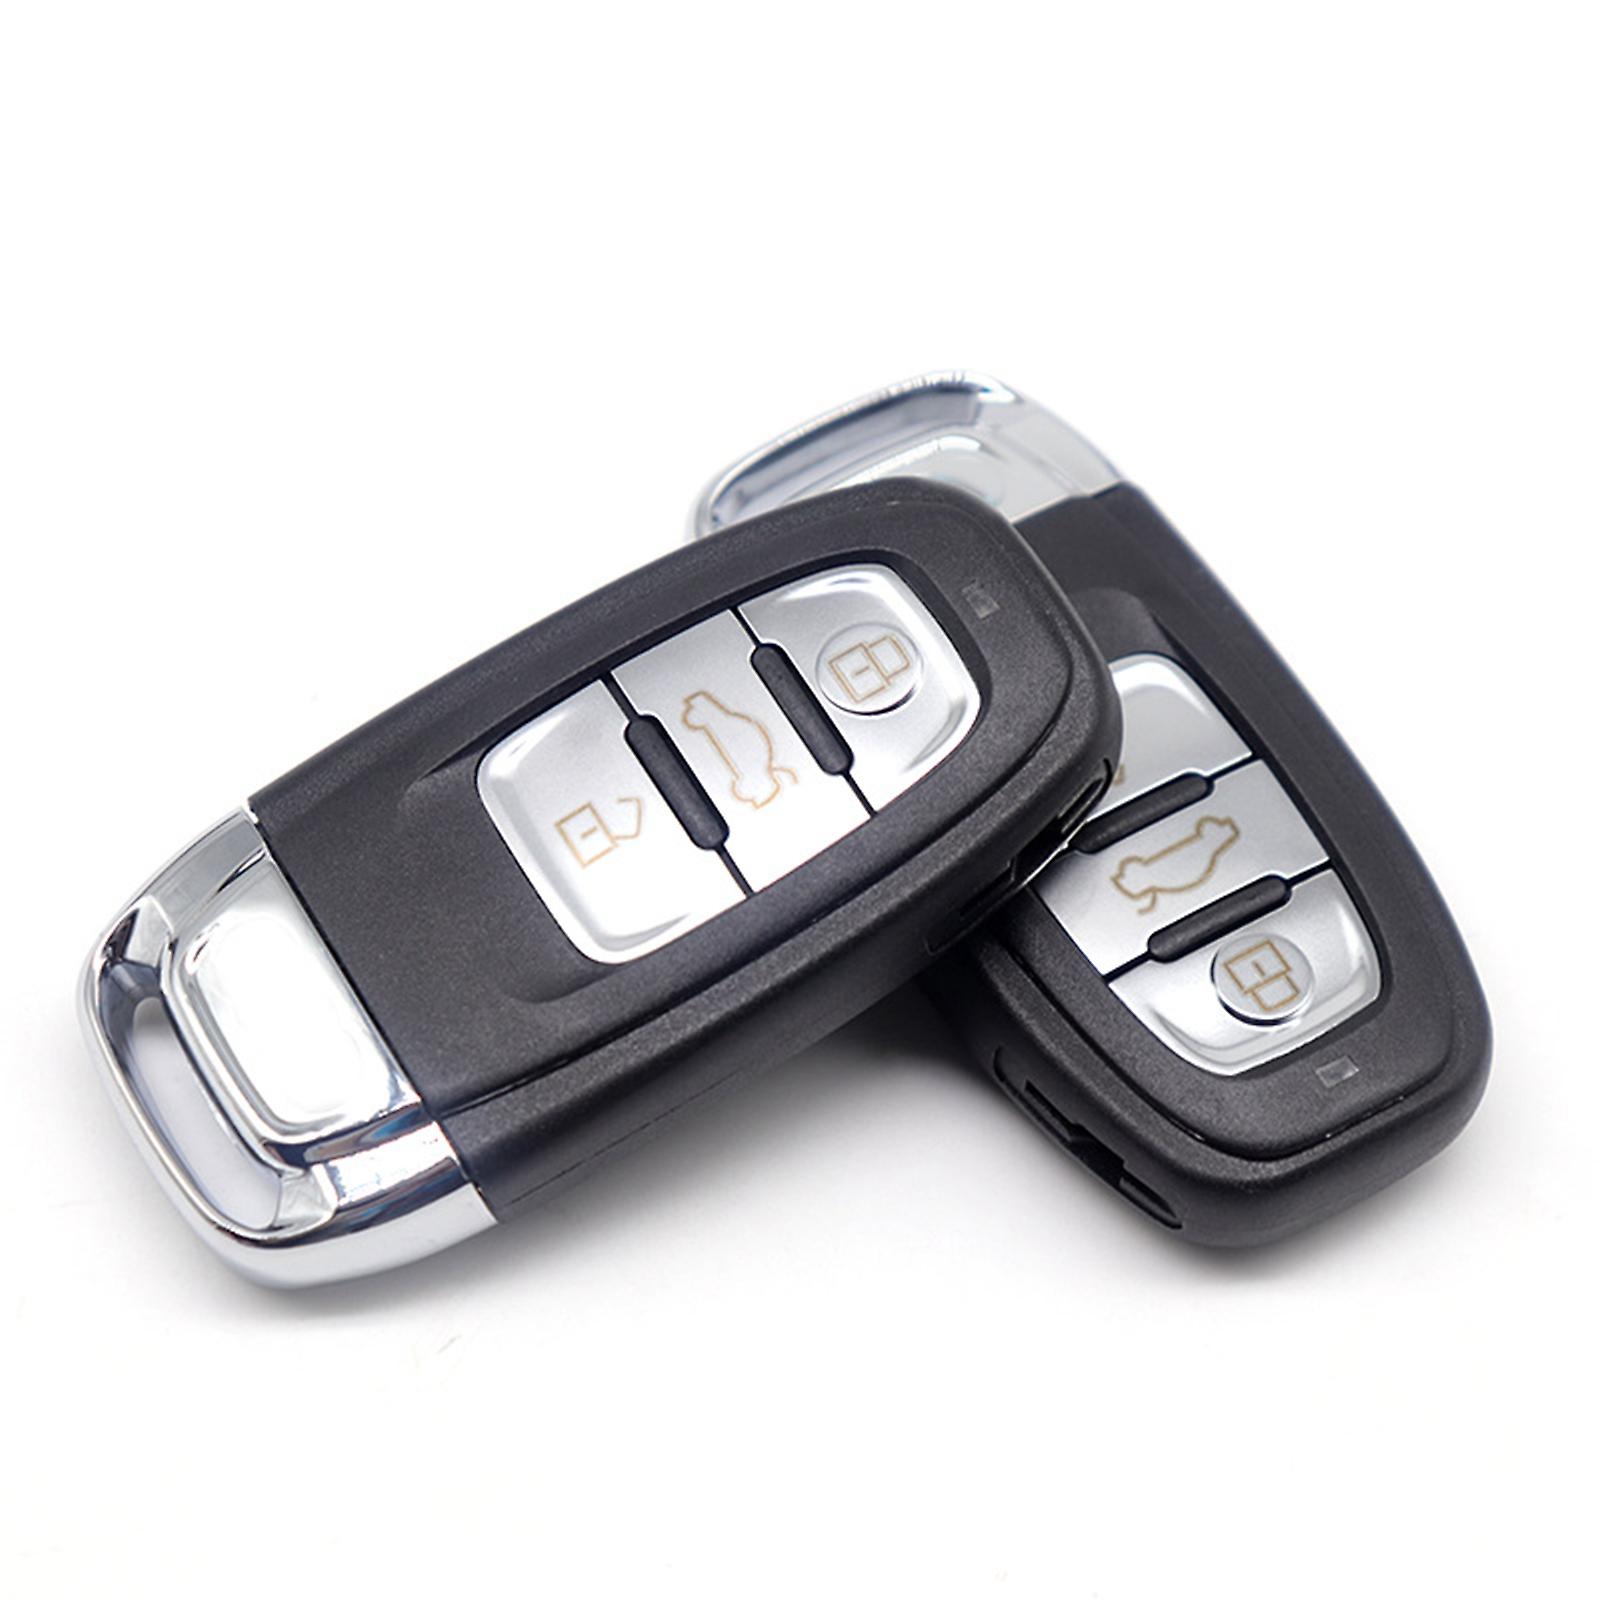 Are Audi car keys compatible with keyless entry and push-button start features?